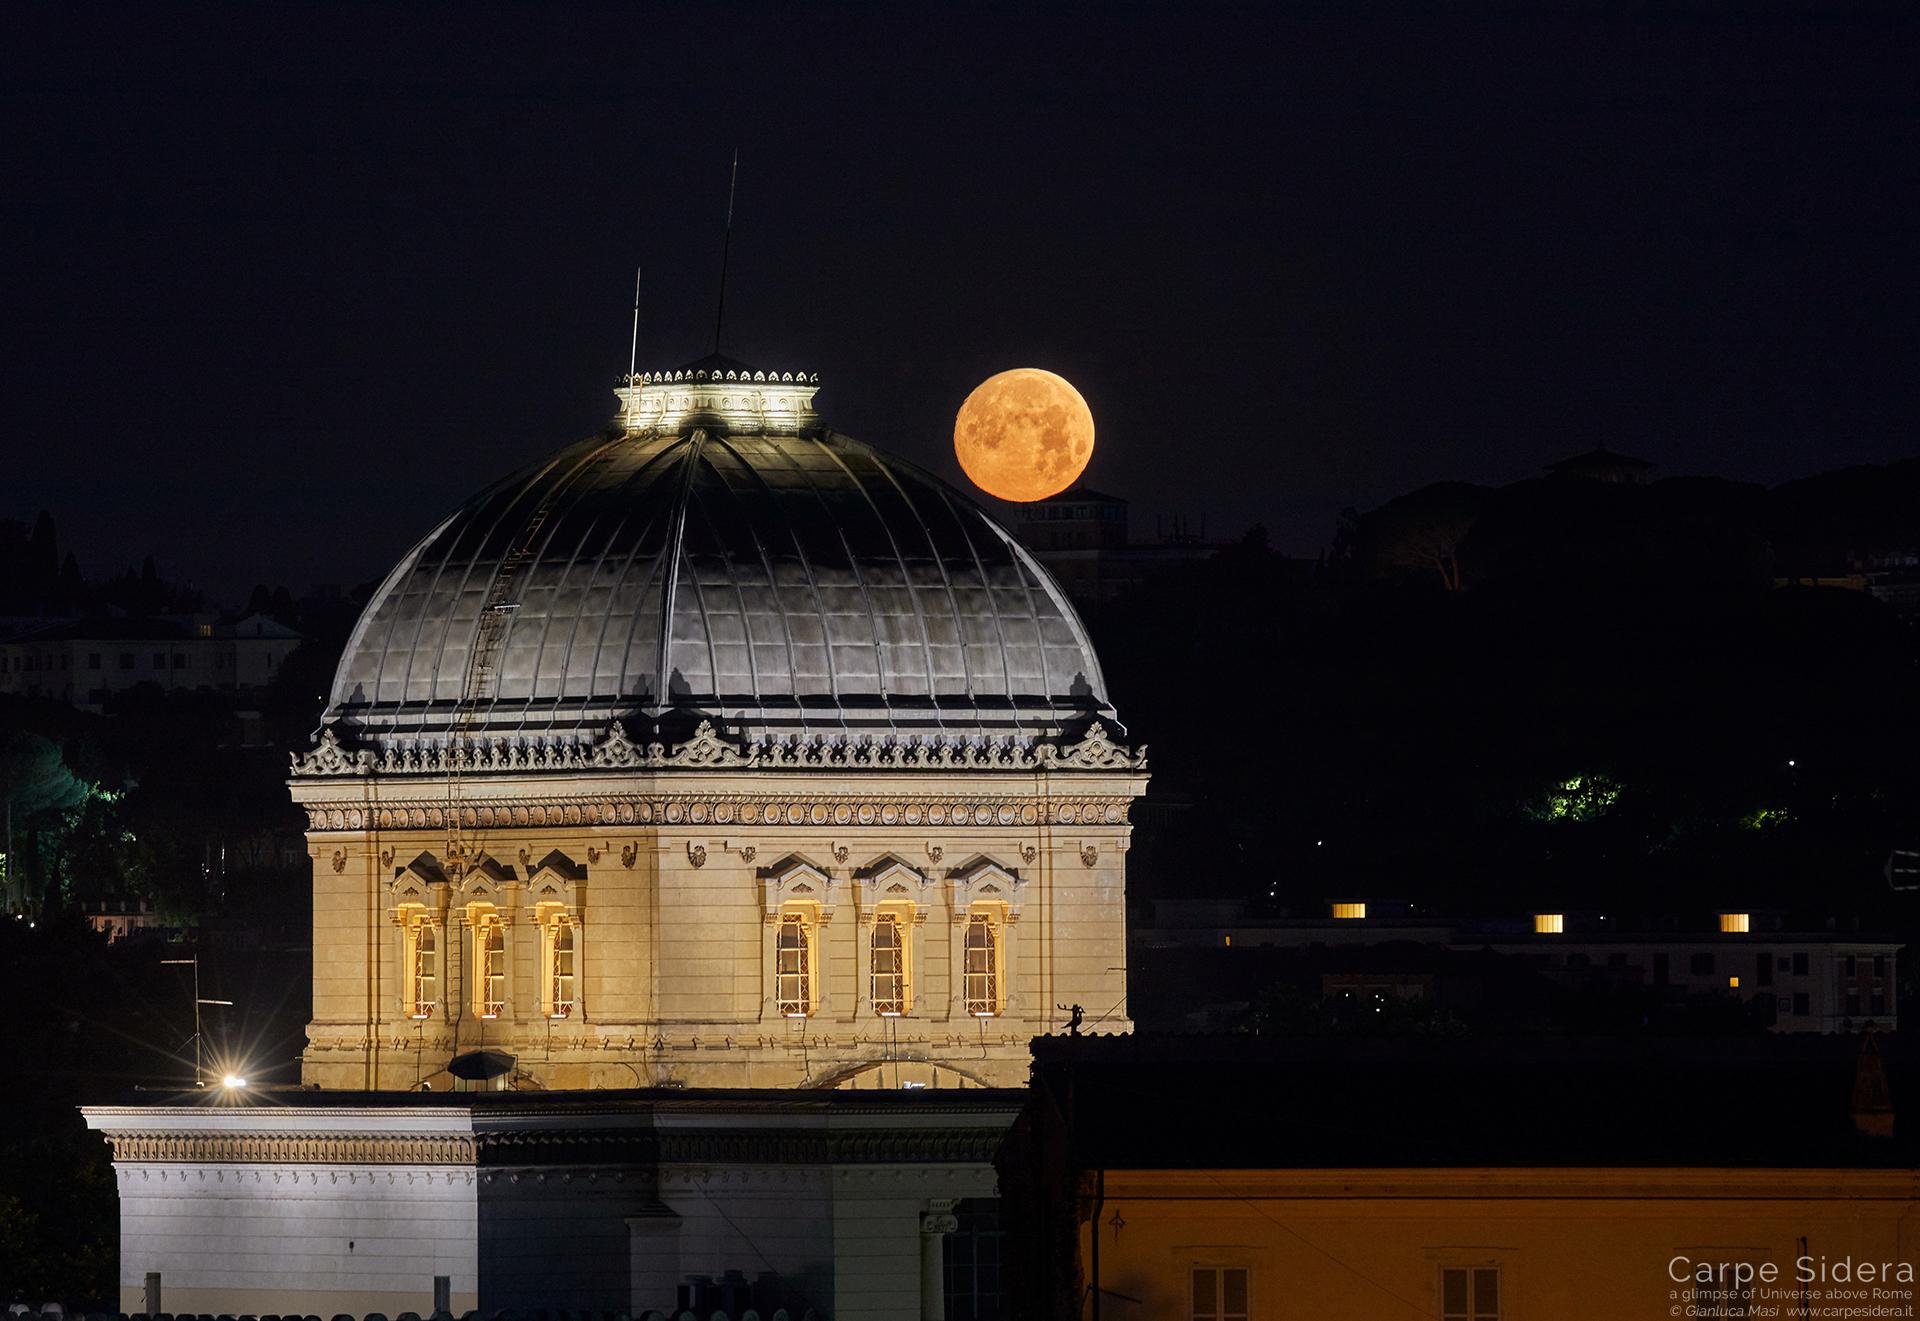 On 16 June 2019, an almost full Moon set in a still dark sky behind the Synagogue of Rome -16 June 2019